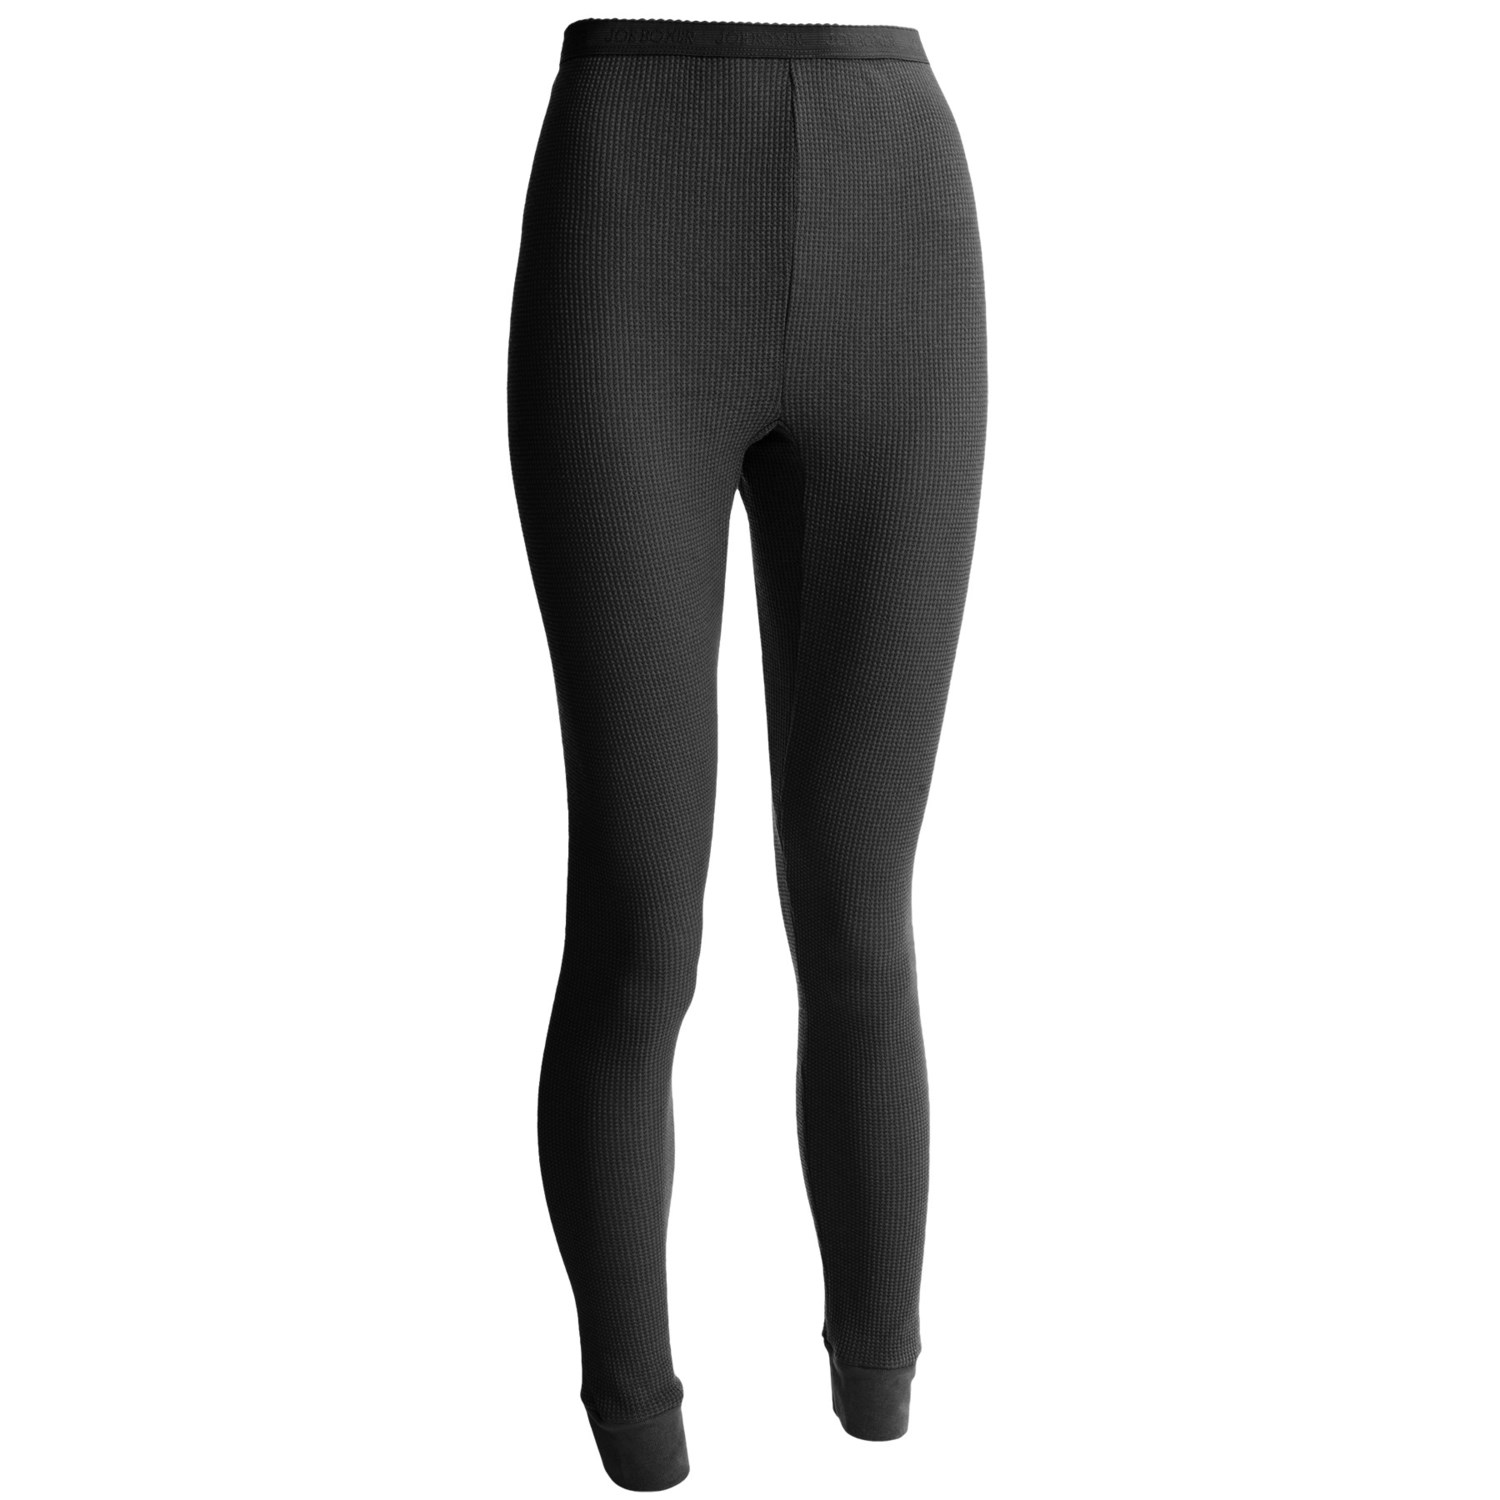 Thermal Knit Bottoms (For Women) 8025Y - Save 50%